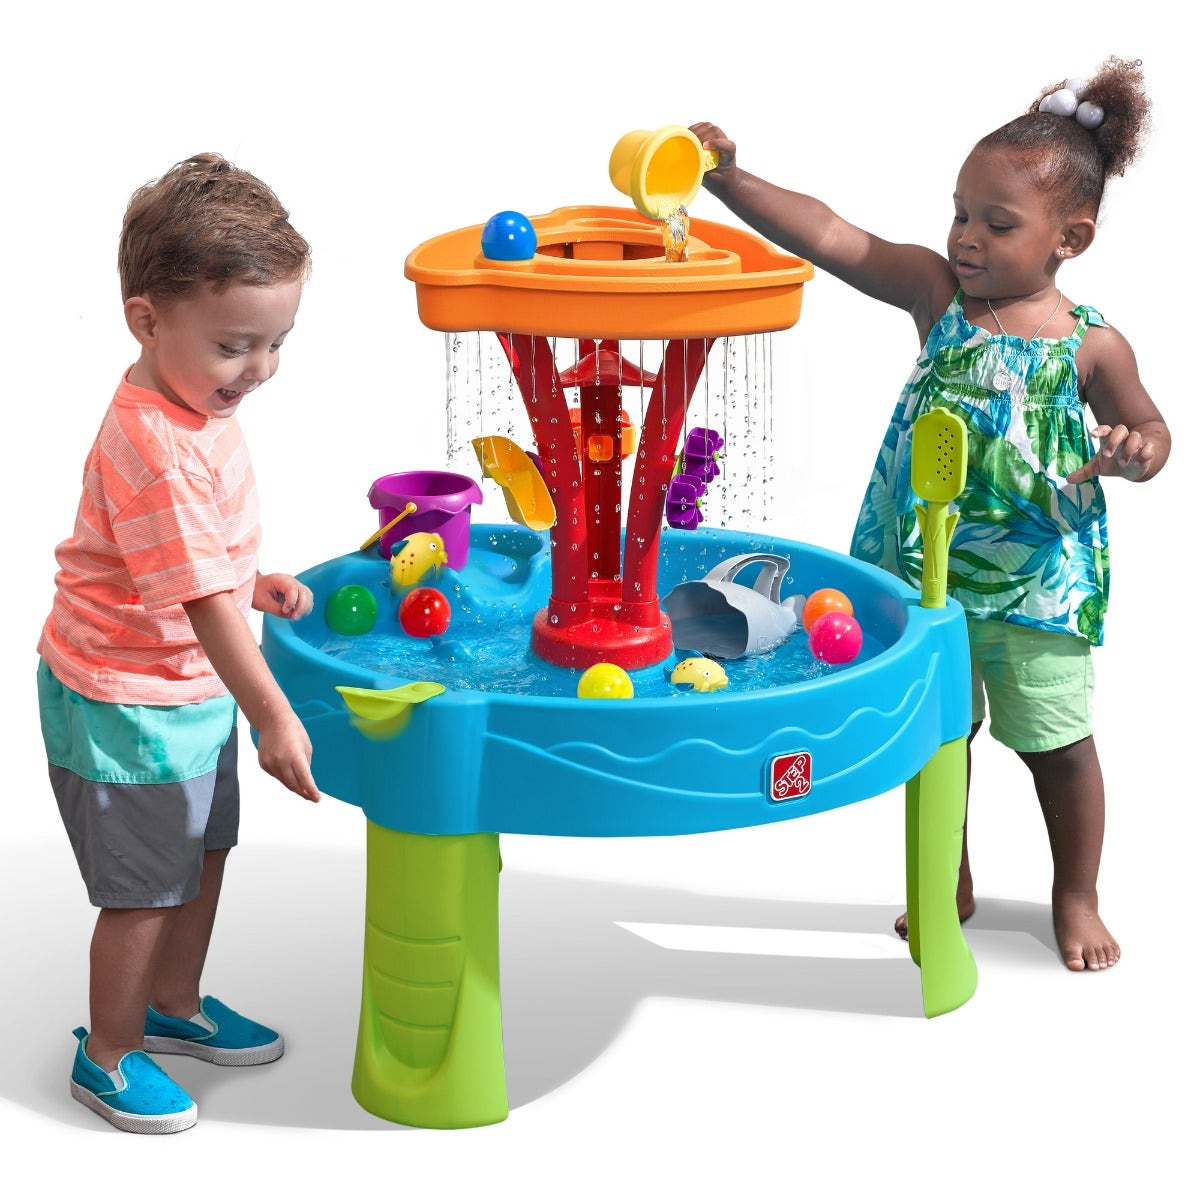 Seaside Water Table from Step2